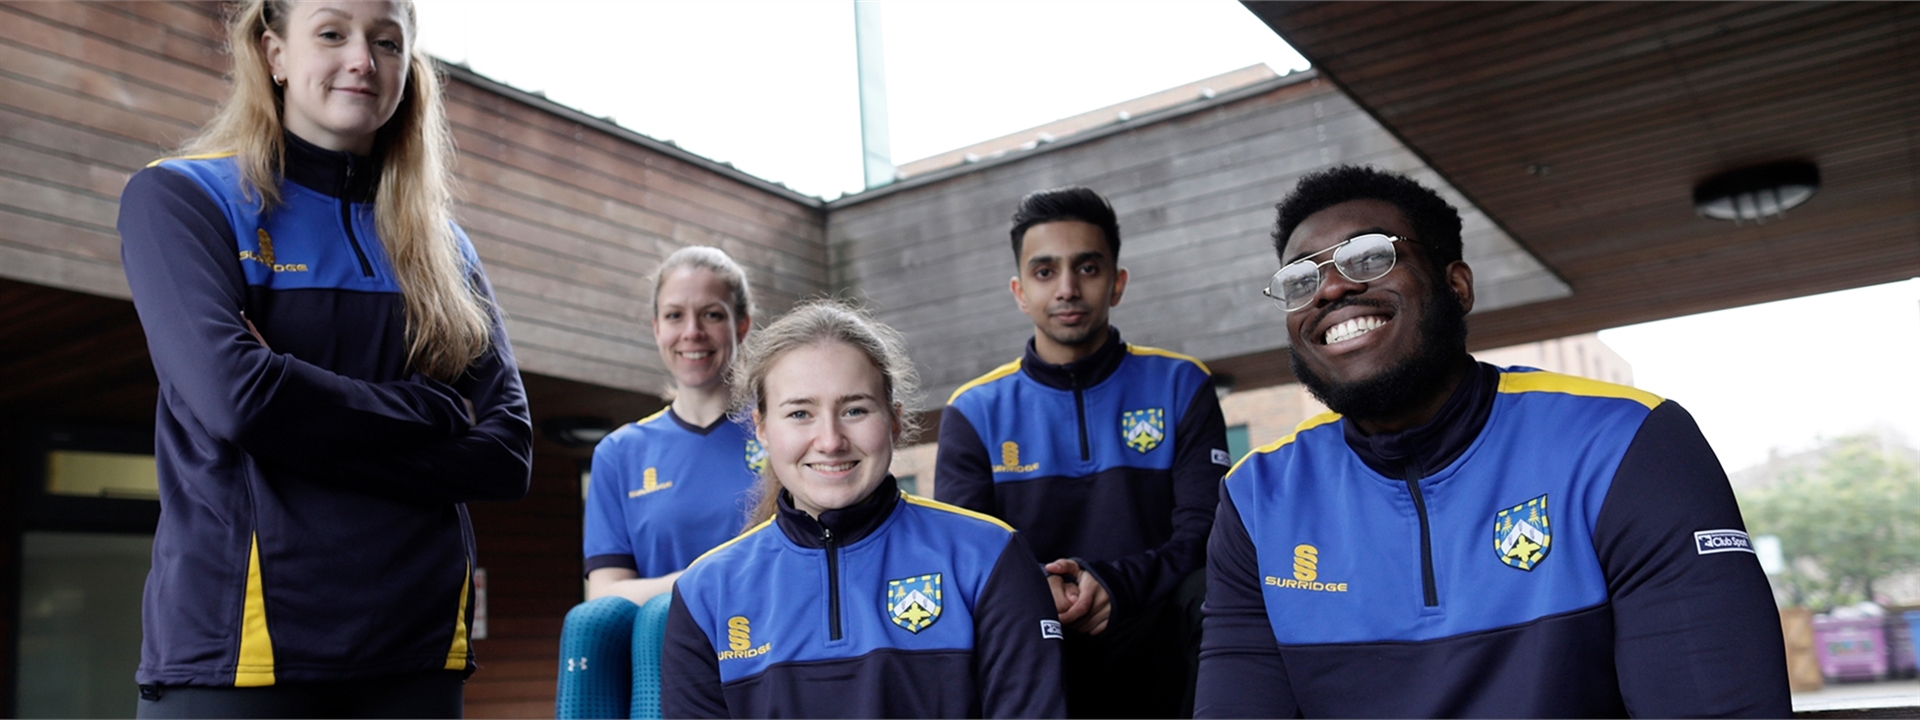 Our performance sport programme provides a comprehensive support network to help our high performing teams and athletes to achieve their goals.